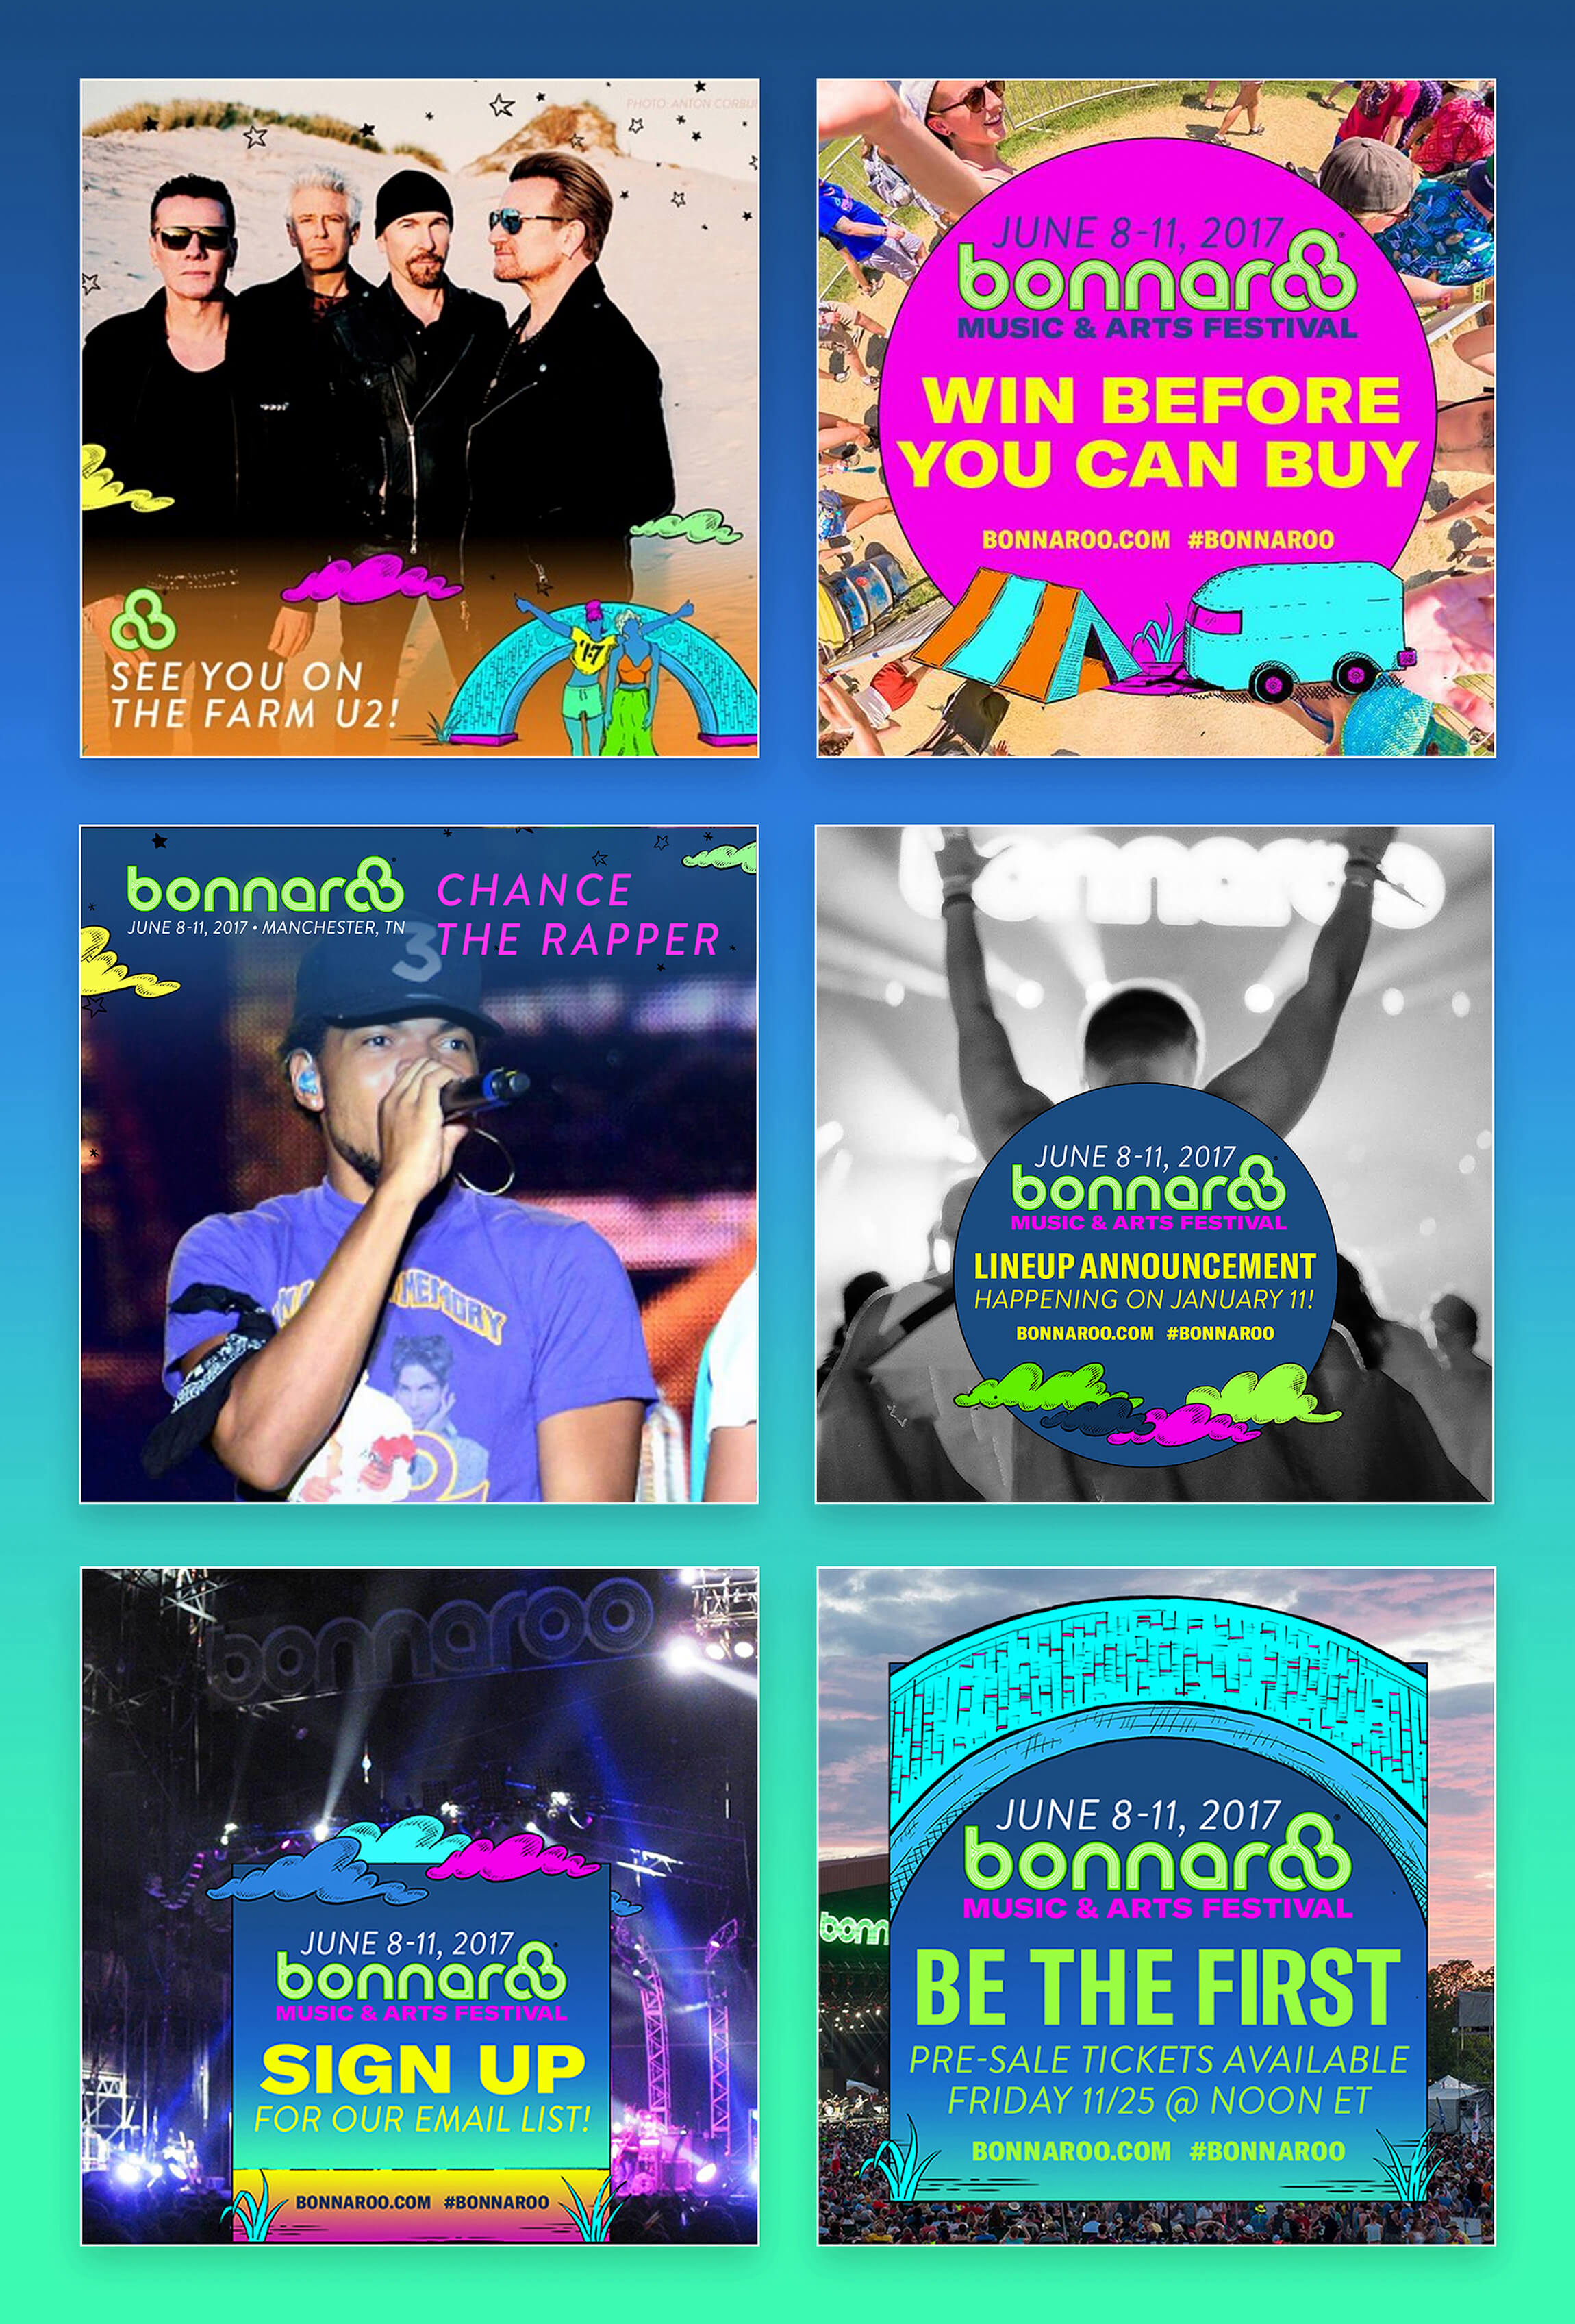 An arrangement of different marquee images developed for Bonnaroo to make announcements on its social channels.